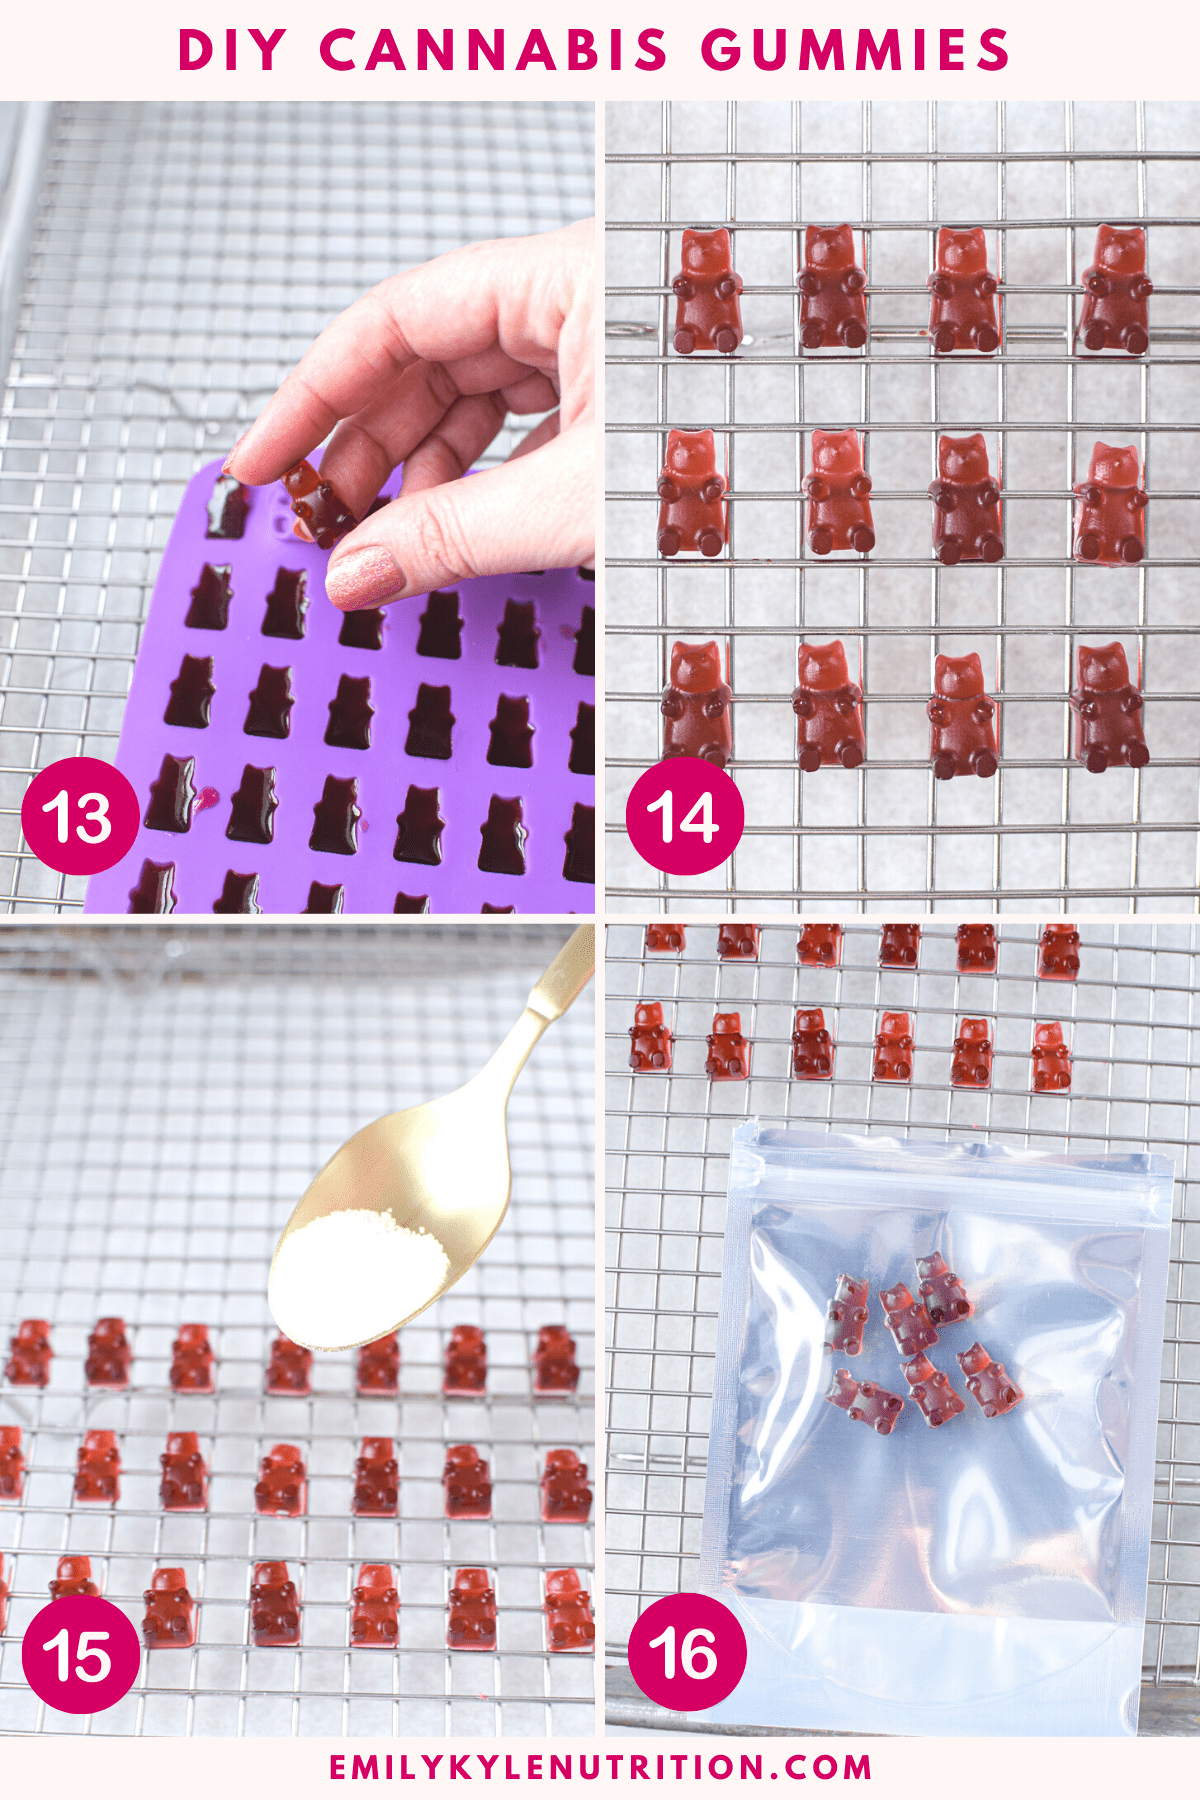 A four step image collage showing the next four steps needed to make cannabis gummies